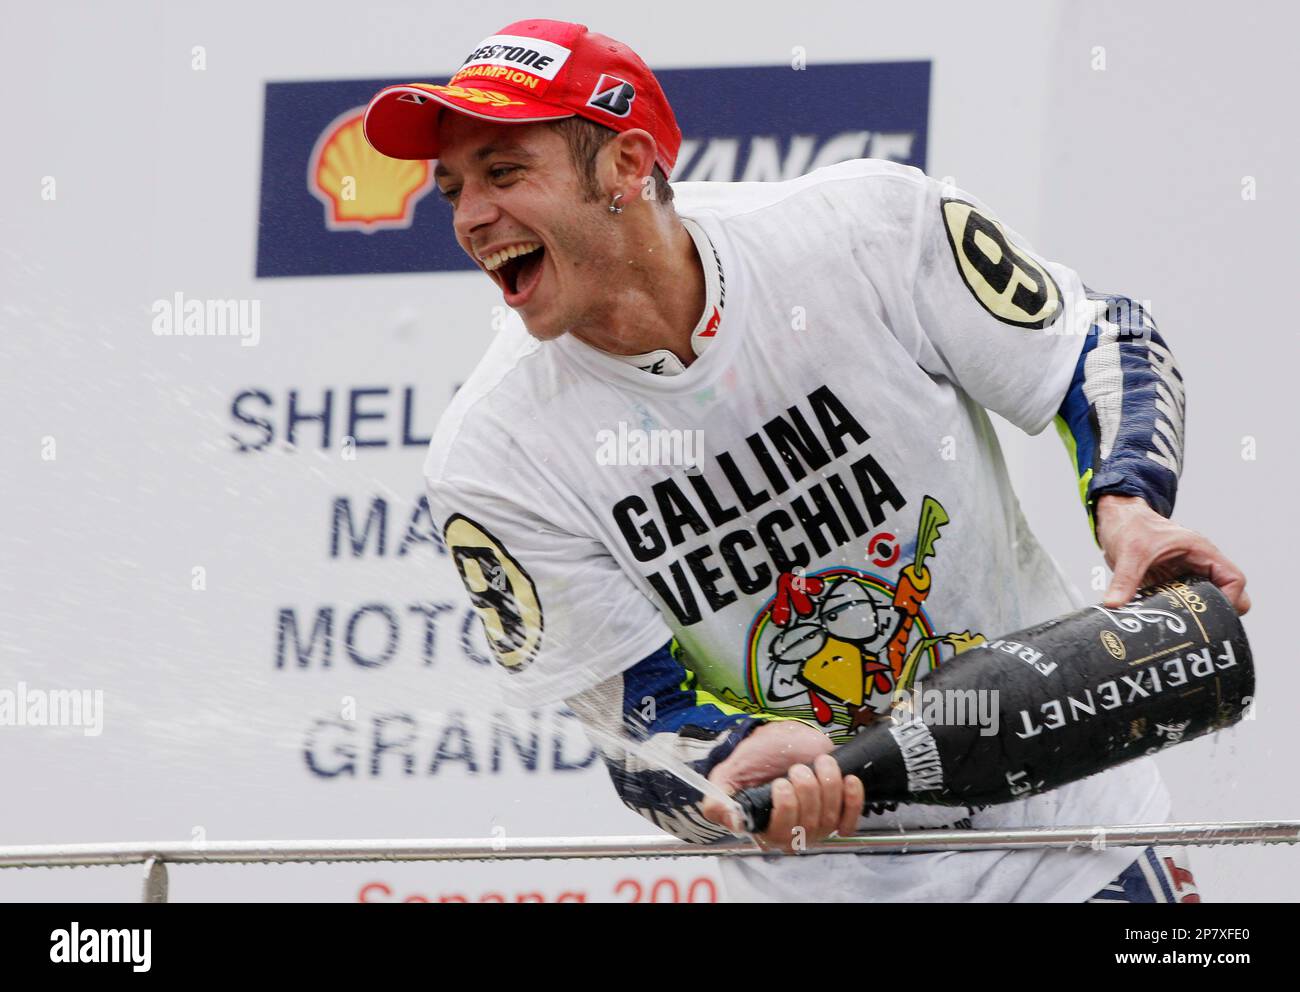 Italy's Valentino Rossi sprays champagne as he after winning the MotoGP World Championship with his third place finish at the Malaysian Grand Prix motorcycle racing at the Sepang International